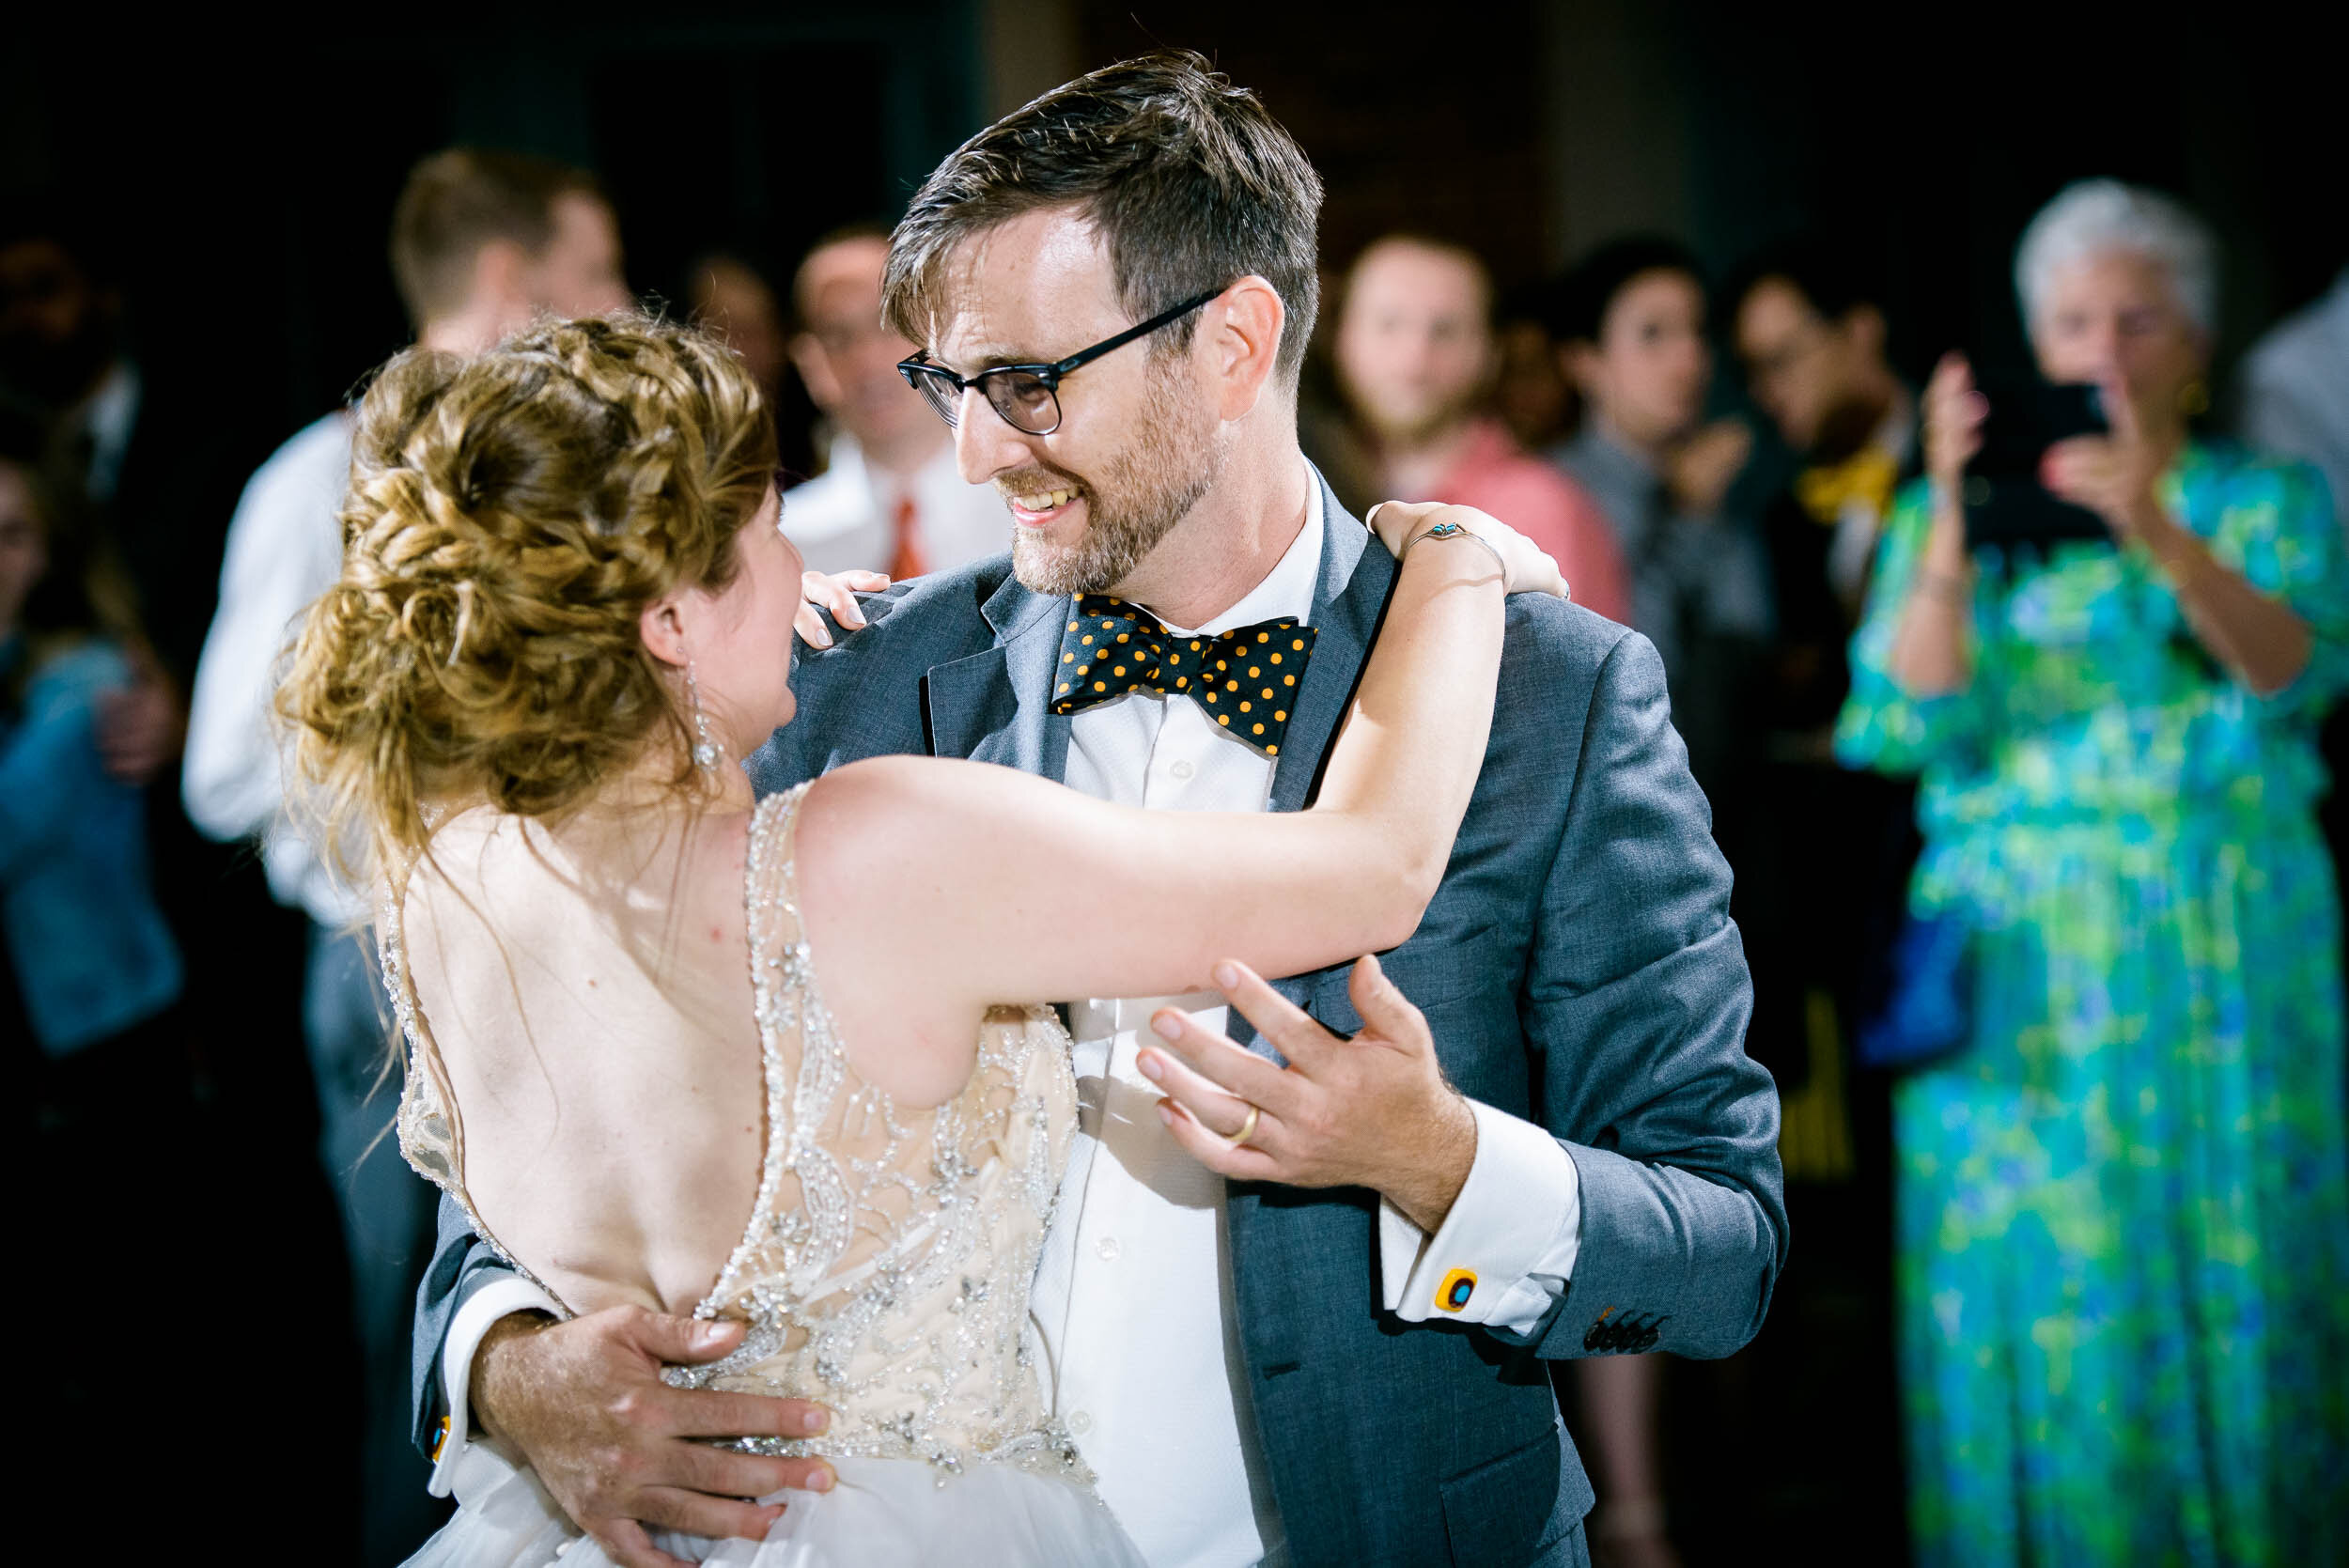 Couple's first dance during their reception: Columbus Park Refectory Chicago wedding captured by J. Brown Photography.